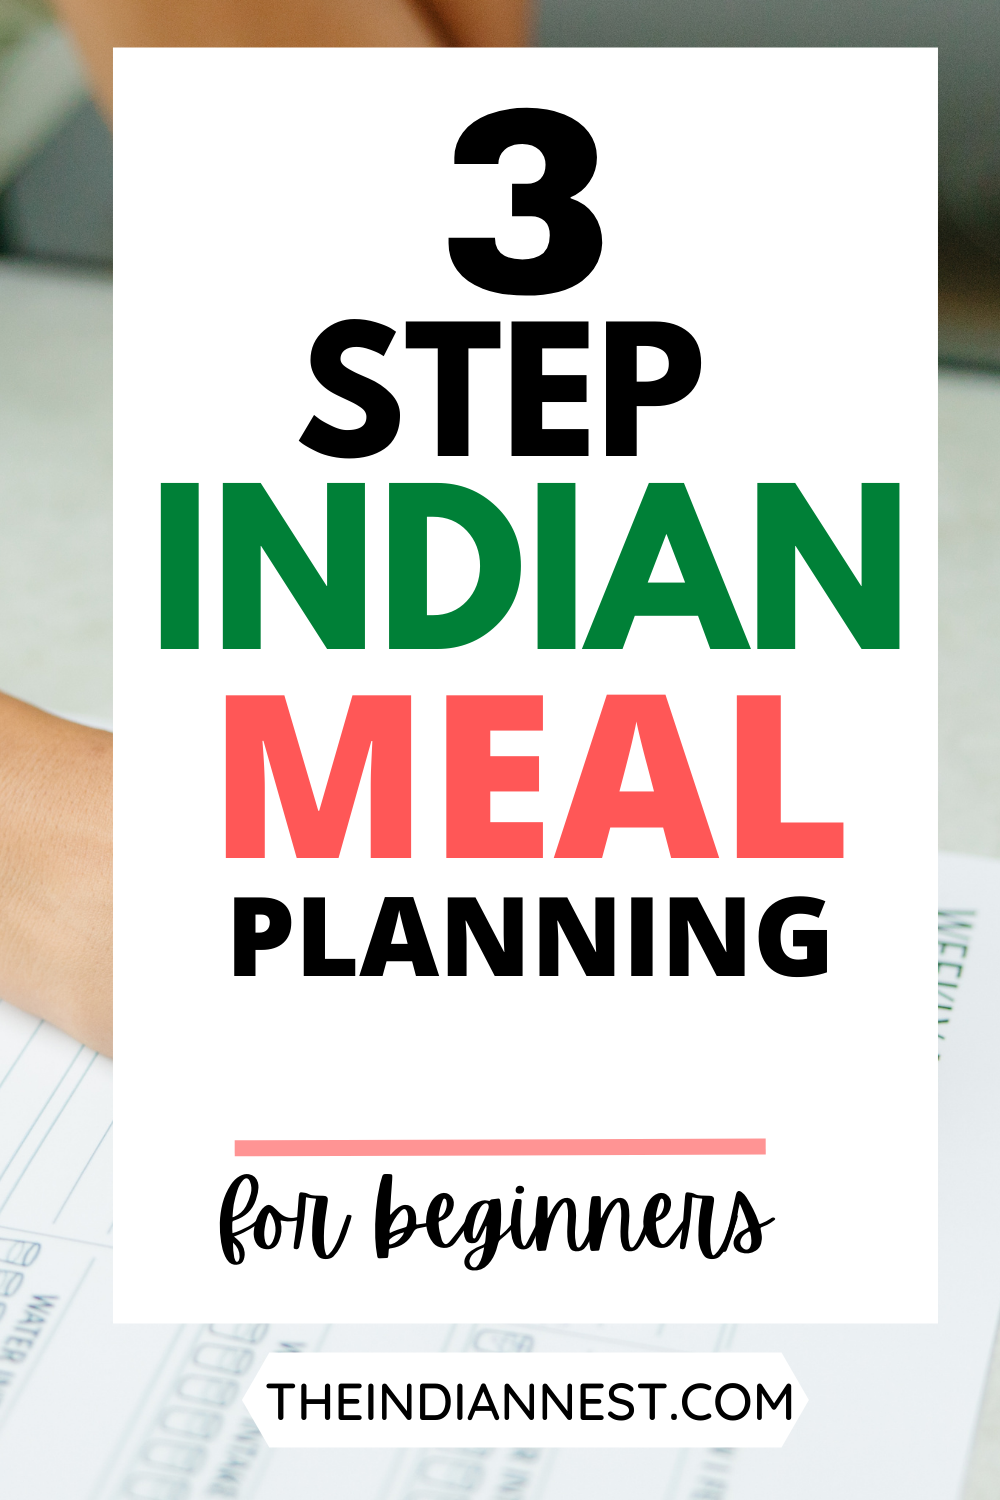  Indian Meal Plan For A Week For Busy Working Moms. Indian meal planning for busy working moms. Indian meal planning for beginners.